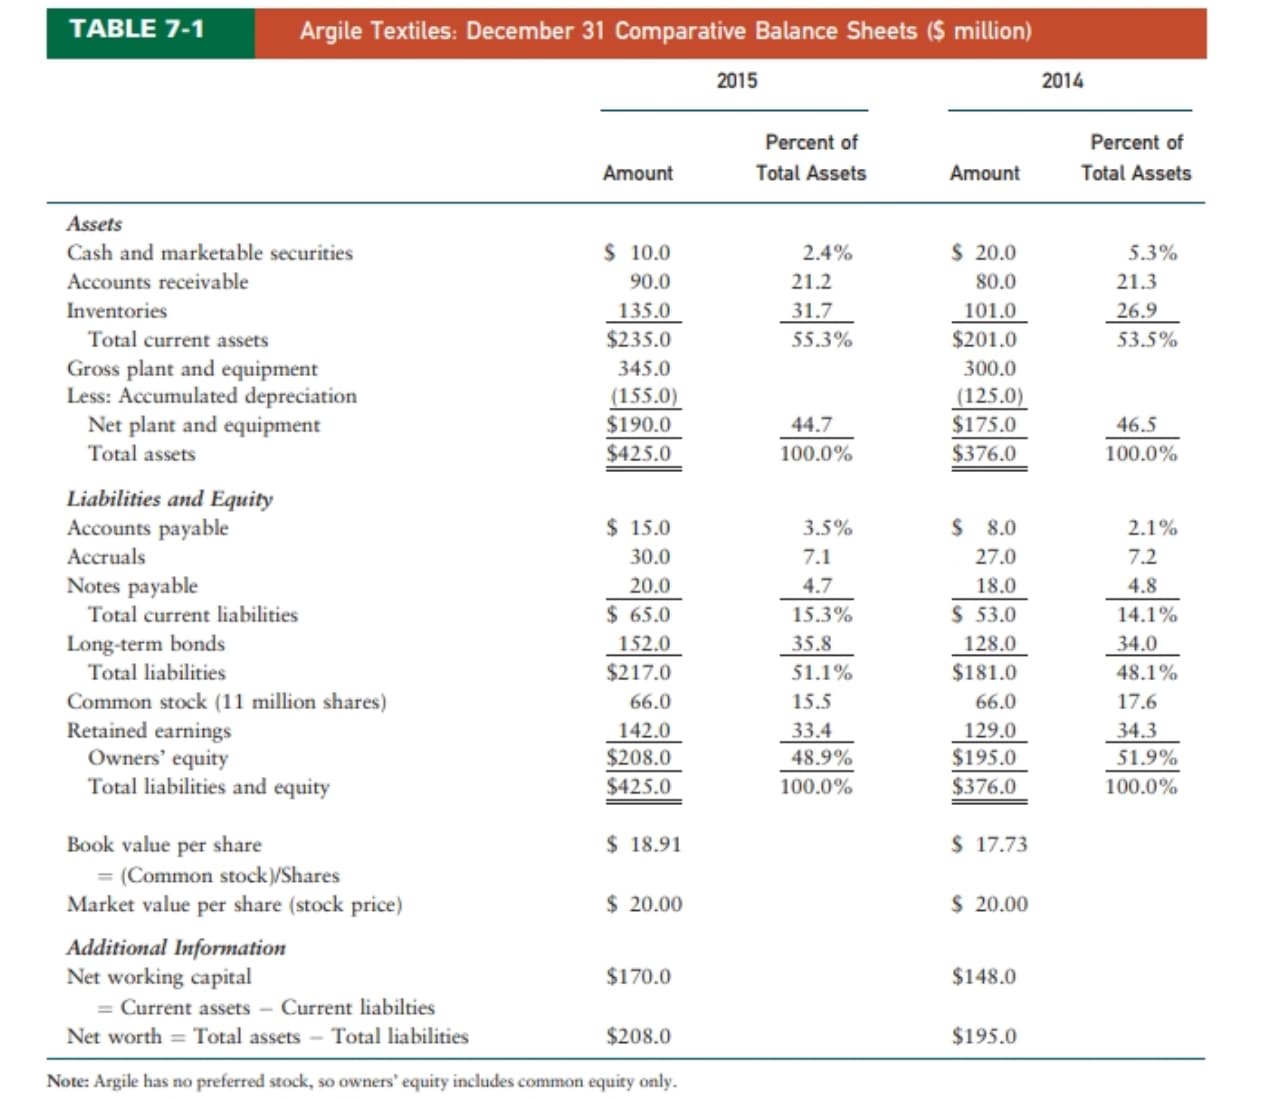 TABLE 7-1
Argile Textiles: December 31 Comparative Balance Sheets ($ million)
2015
2014
Percent of
Percent of
Amount
Total Assets
Amount
Total Assets
Assets
Cash and marketable securities
$ 10.0
2.4%
$ 20.0
5.3%
Accounts receivable
90.0
21.2
80.0
21.3
Inventories
135.0
31.7
101.0
26.9
Total current assets
$235.0
55.3%
$201.0
53.5%
Gross plant and equipment
Less: Accumulated depreciation
Net plant and equipment
Total assets
345.0
300.0
(155.0)
$190.0
(125.0)
$175.0
44.7
46.5
$425.0
100.0%
$376.0
100.0%
Liabilities and Equity
Accounts payable
$ 15.0
3.5%
$ 8.0
2.1%
Accruals
30.0
7.1
27.0
7.2
Notes payable
Total current liabilities
20.0
4.7
18.0
4.8
$ 65.0
152.0
$217.0
15.3%
$ 53.0
14.1%
Long-term bonds
Total liabilities
35.8
128.0
$181.0
34.0
51.1%
48.1%
Common stock (11 million shares)
Retained earnings
Owners' equity
Total liabilities and equity
66.0
15.5
66.0
17.6
142.0
33.4
129.0
34.3
$208.0
48.9%
$195.0
51.9%
$425.0
100.0%
$376.0
100.0%
Book value per share
$ 18.91
$ 17.73
= (Common stock)/Shares
Market value per share (stock price)
$ 20.00
$ 20.00
Additional Information
Net working capital
= Current assets - Current liabilties
$170.0
$148.0
Net worth = Total assets - Total liabilities
$208.0
$195.0
Note: Argile has no preferred stock, so owners' equity includes common equity only.
